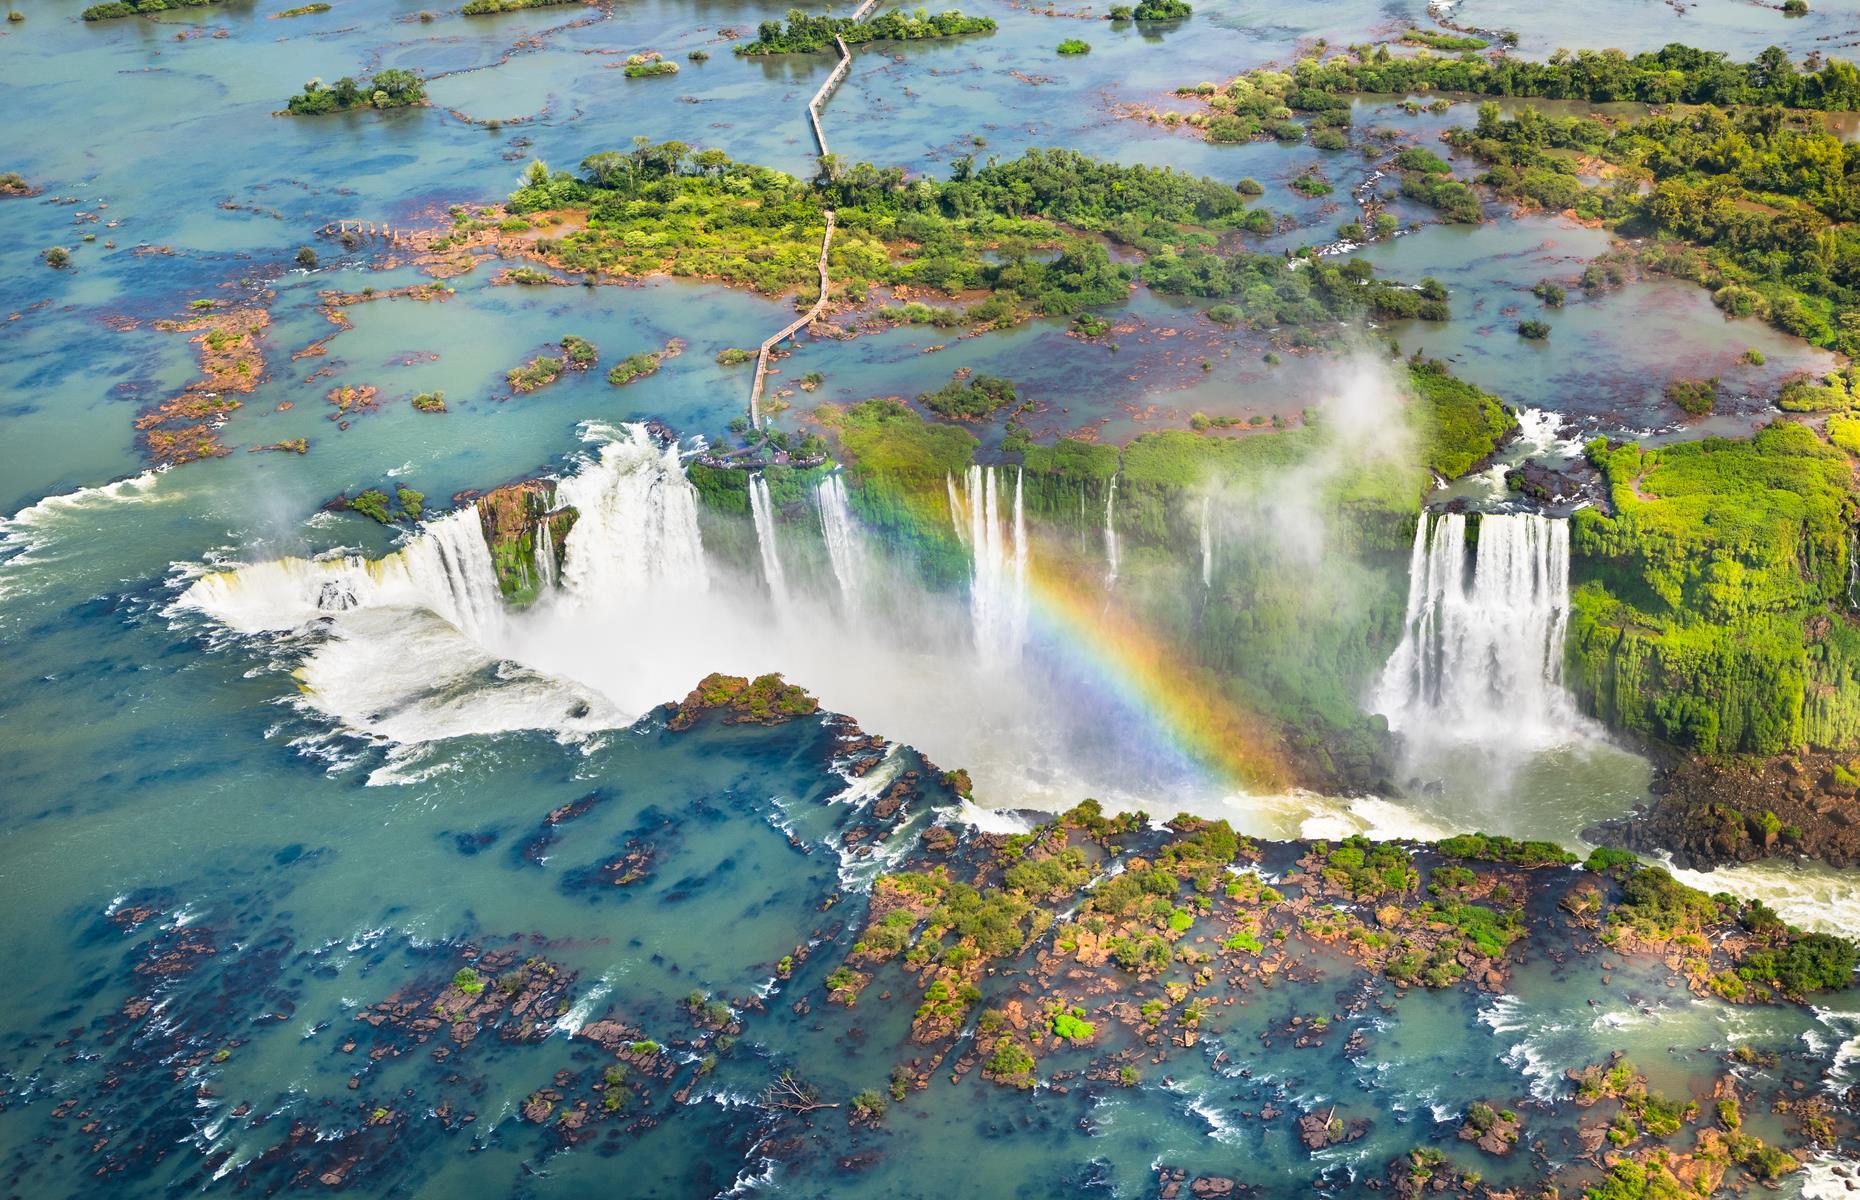 When one waterfall just isn’t enough, there’s Iguazú Falls – the world’s largest waterfall system and certainly among the most awe-inspiring sights. The chain of cascades, which encompasses more than 270 waterfalls and covers 1.7 miles (2.7km), straddles the border of Brazil and Argentina, and flows in a staircase formation. Its setting, in the heart of a national park thick with rainforest, is equally beguiling.